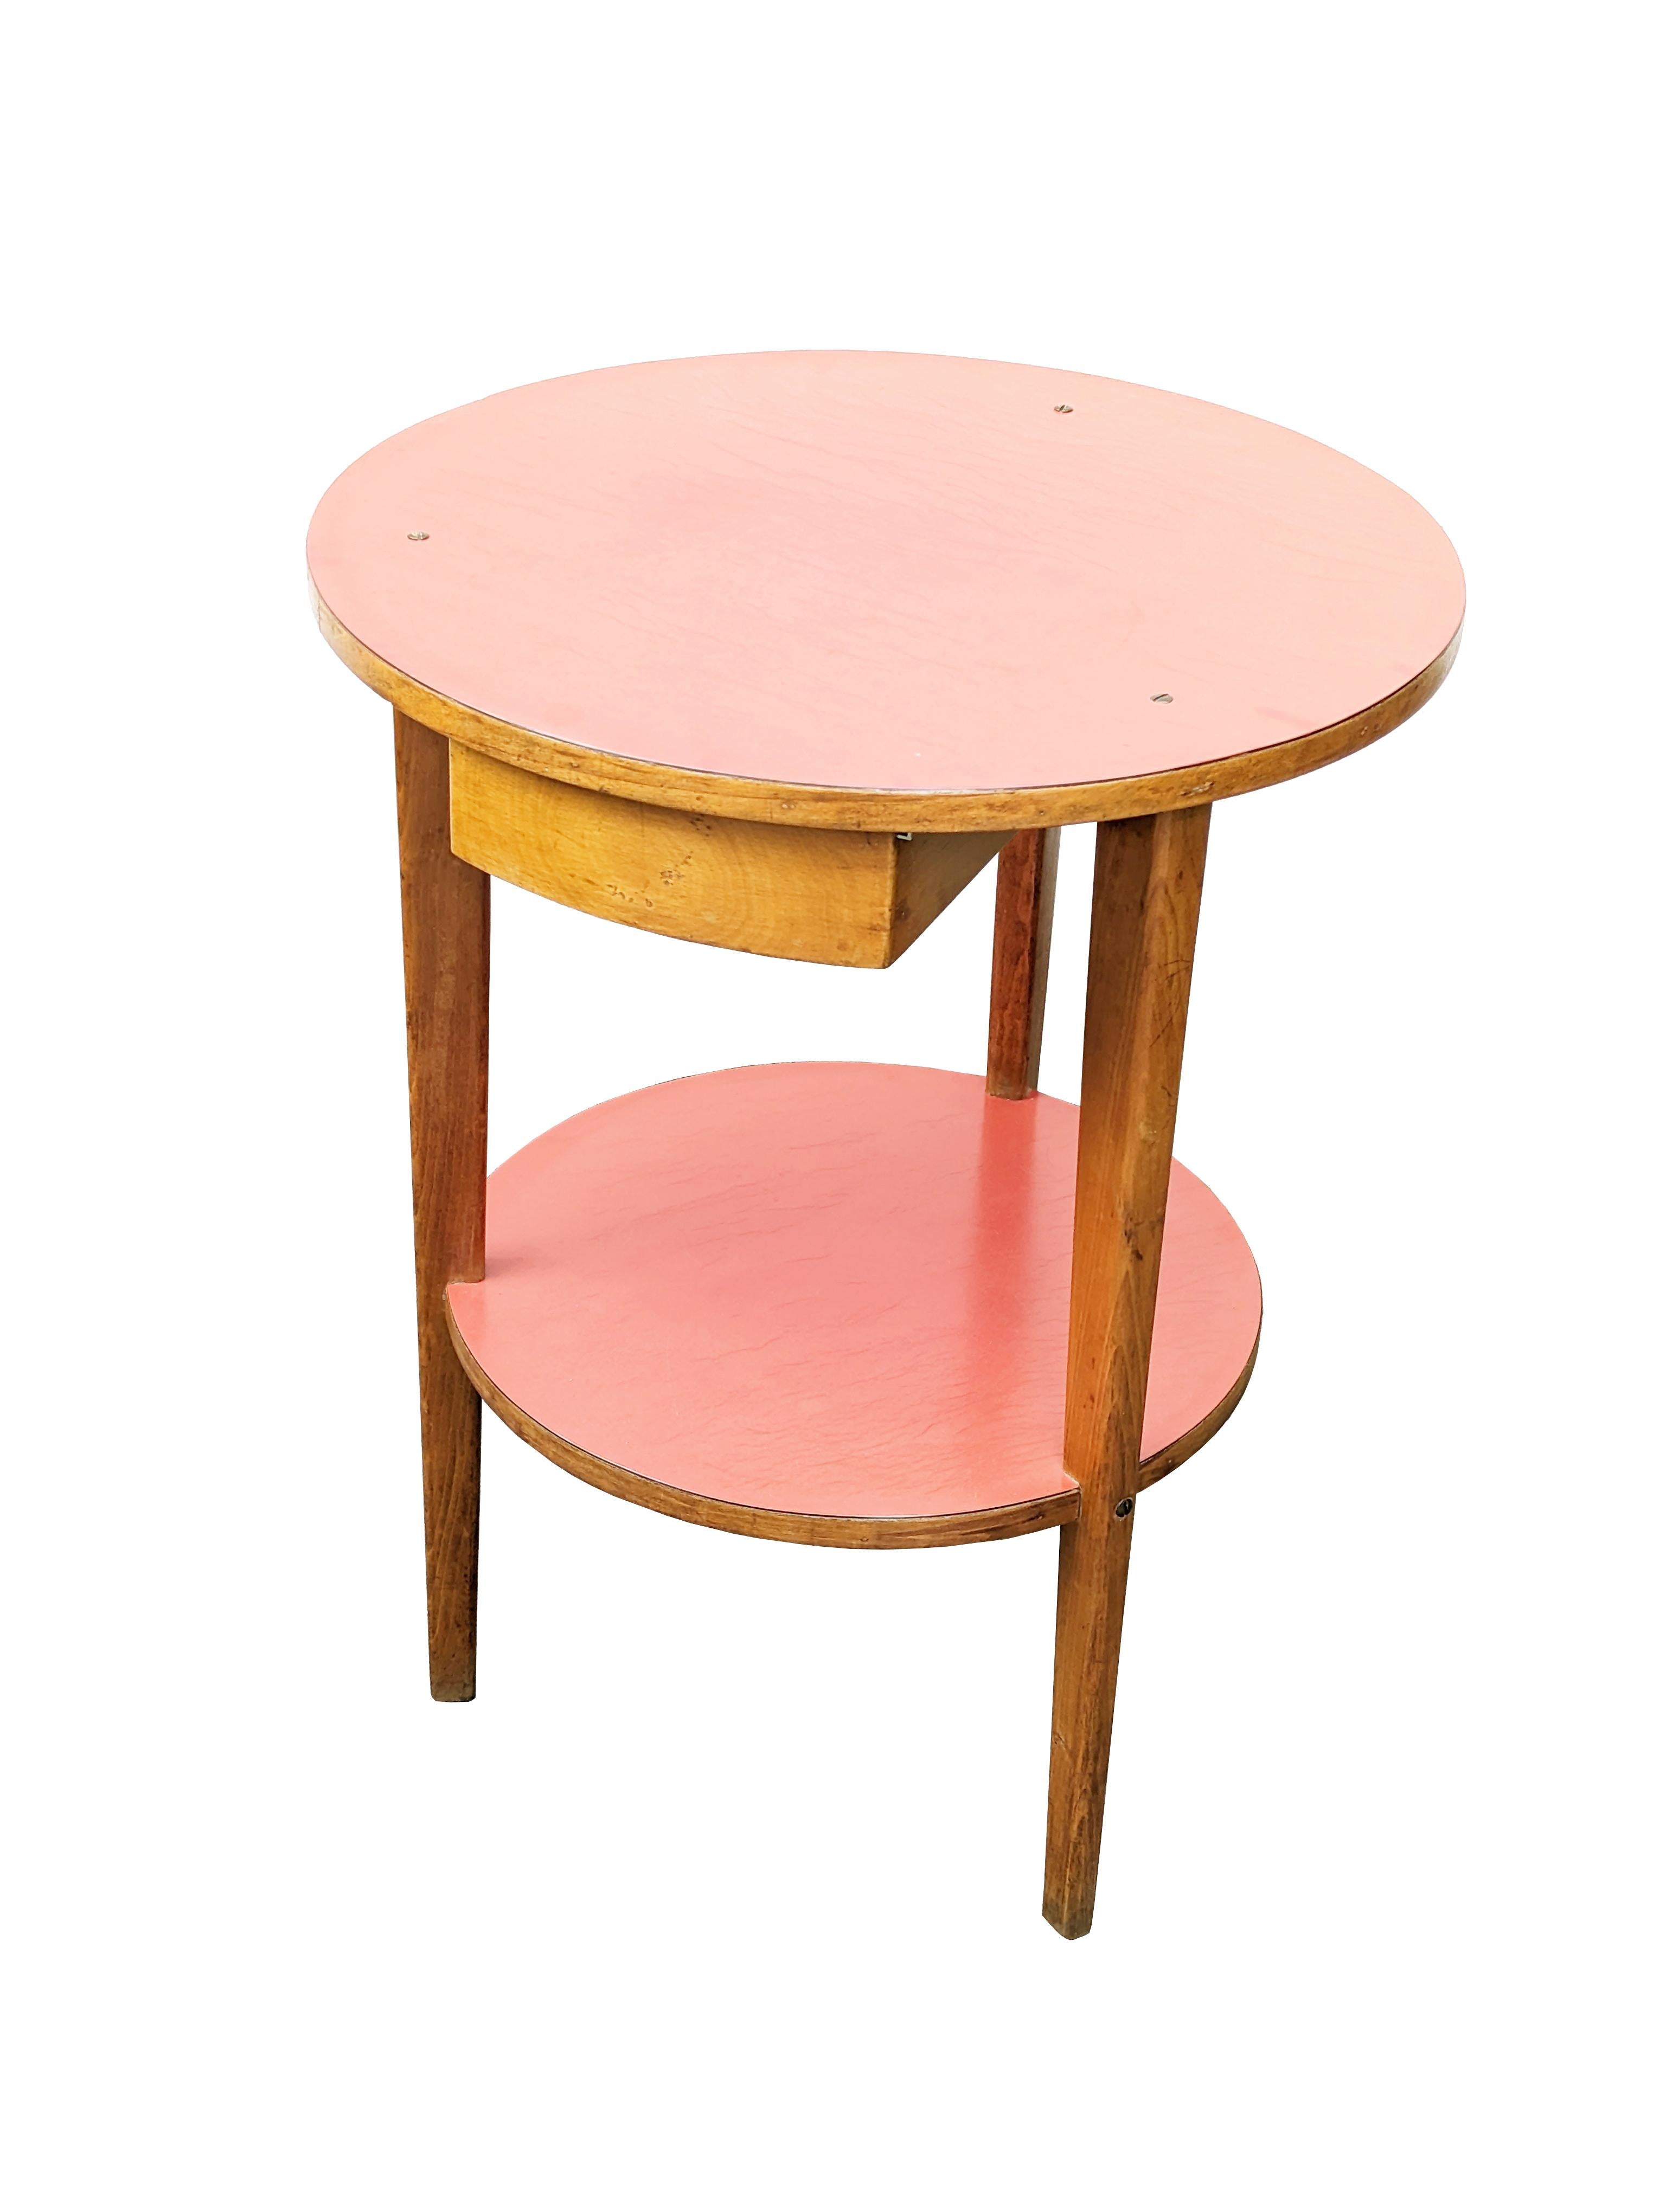 Side table or bedside table with drawer made of wood and 2 laminate top surfaces. It remains in good vintage condition: visible defects of the pink/red plastic laminate (see detailed pictures).